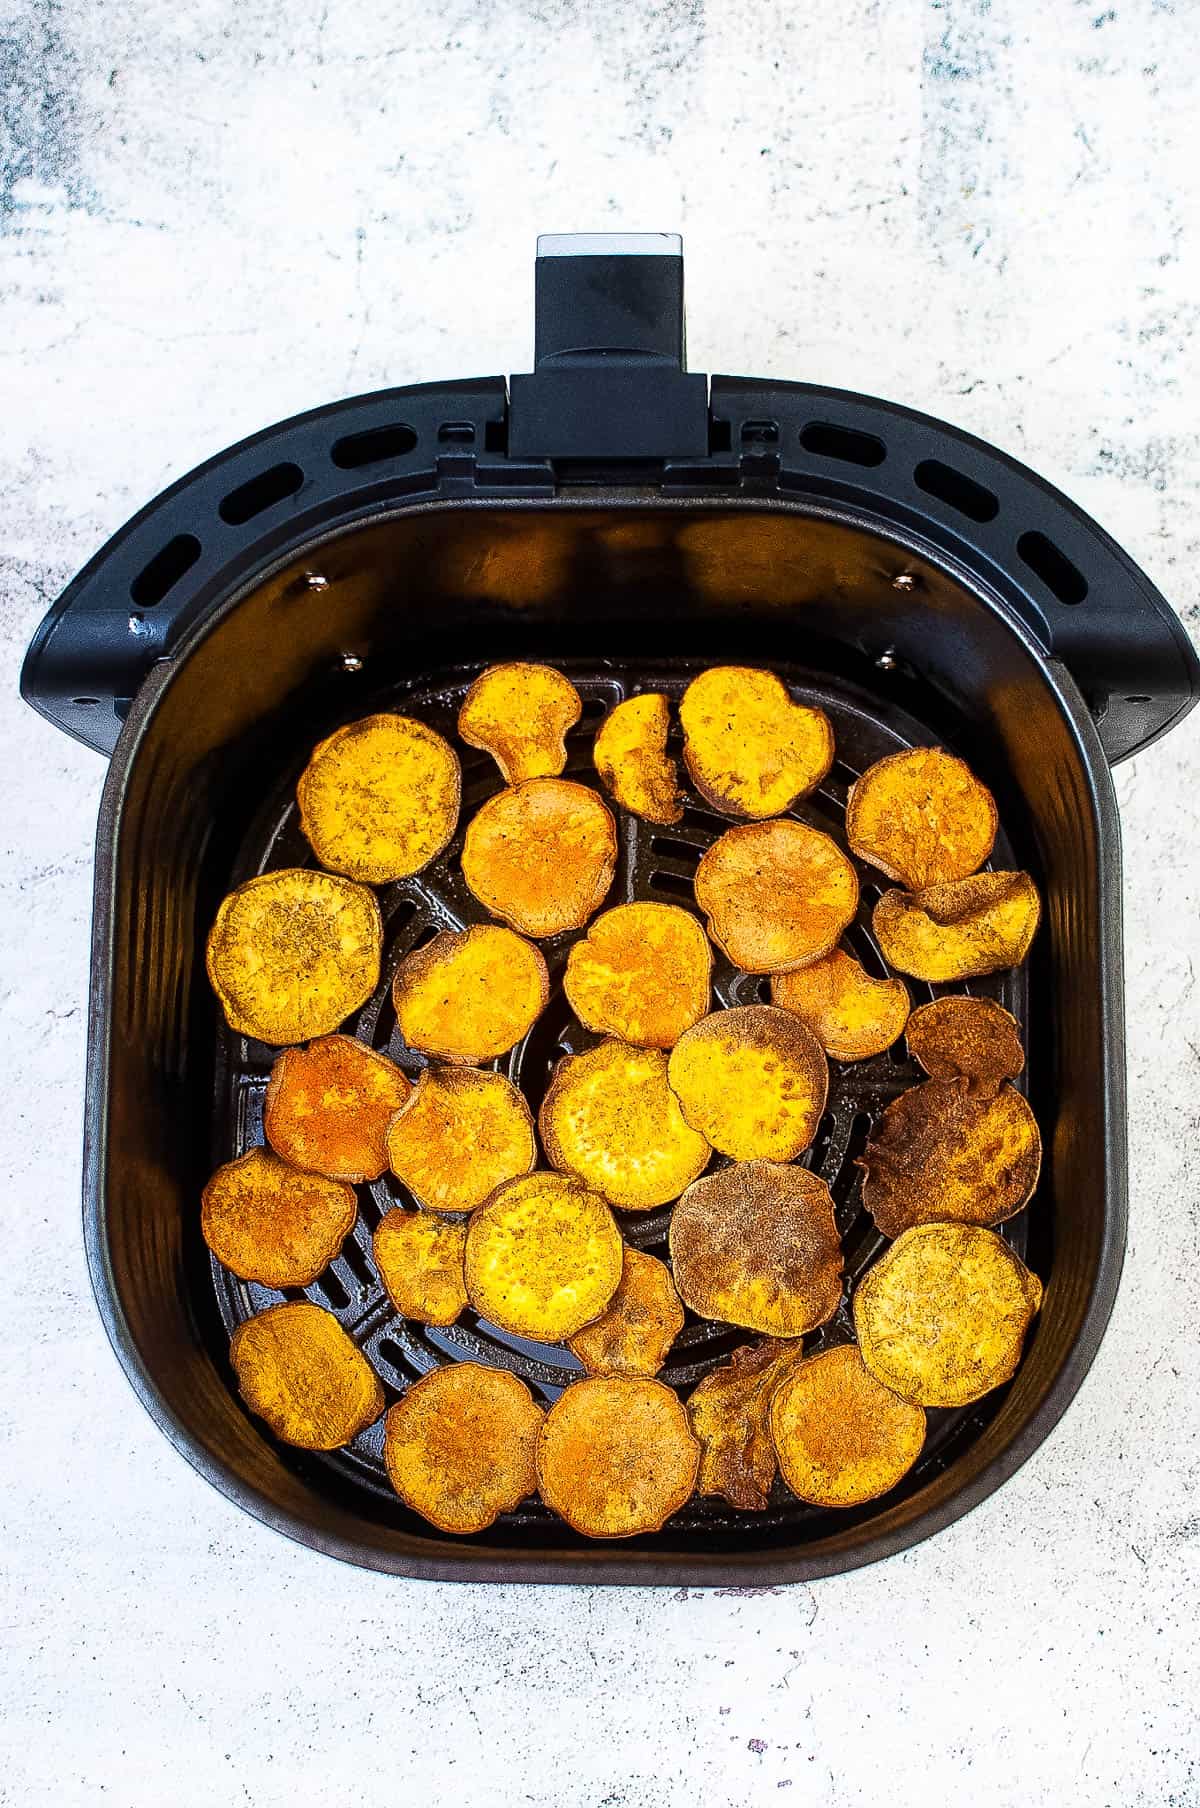 The cooked sweet potato chips in the air fryer basket.